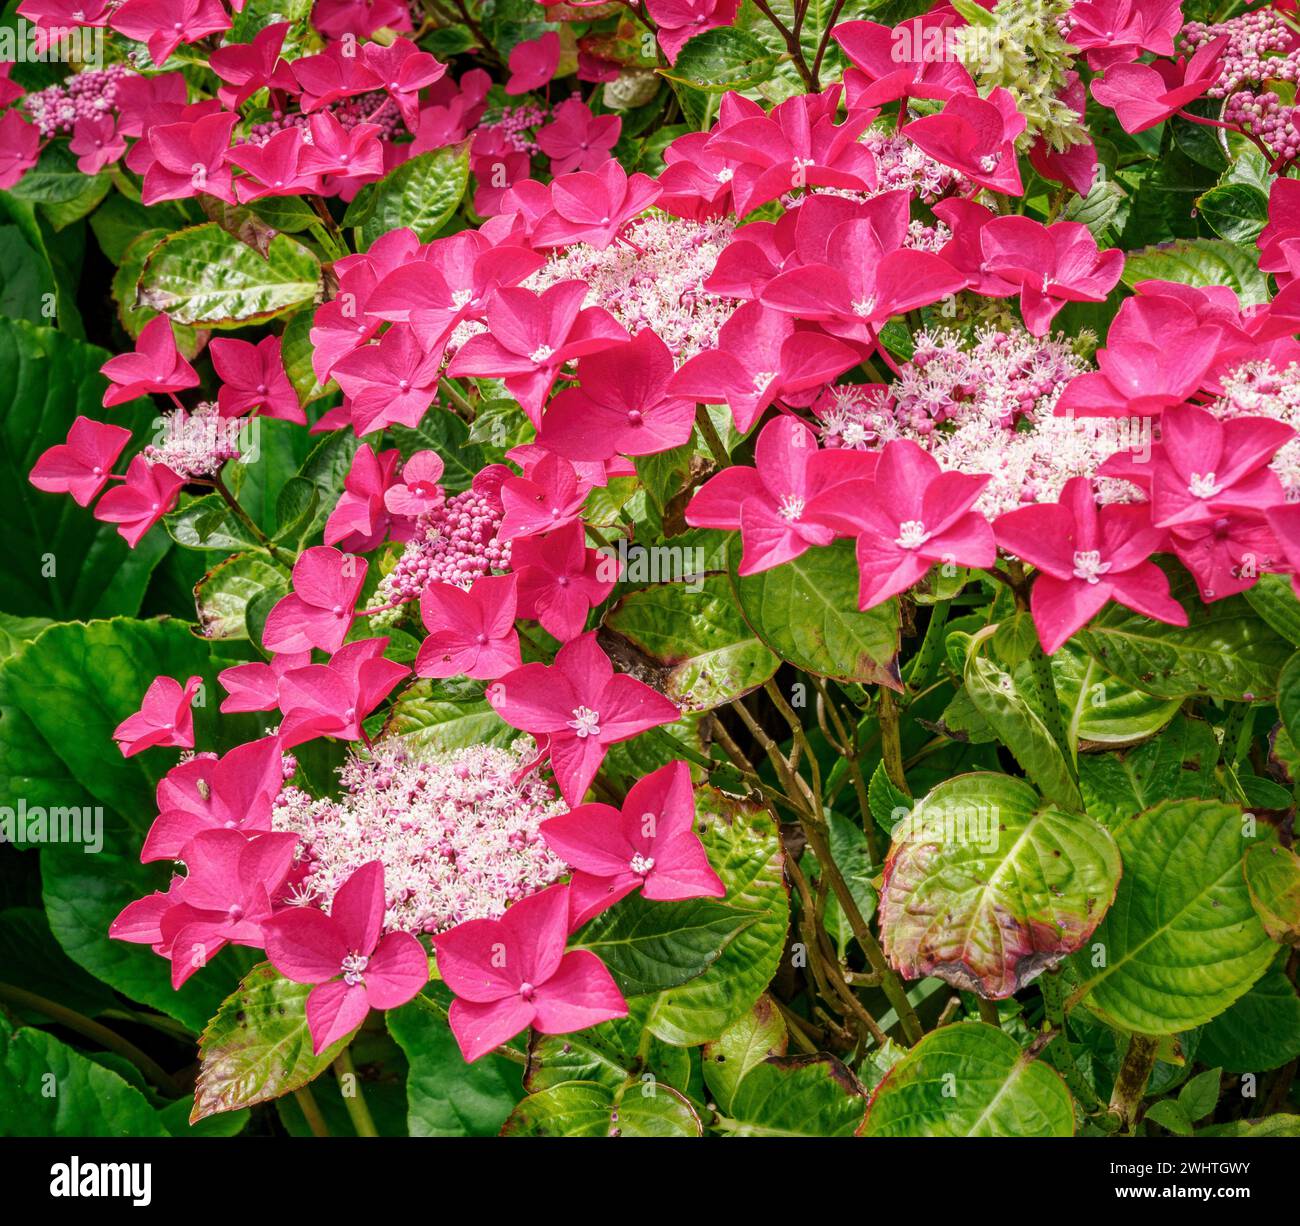 Deep pink bracts of a lacecap hydrangea in a Somerset garden UK Stock Photo